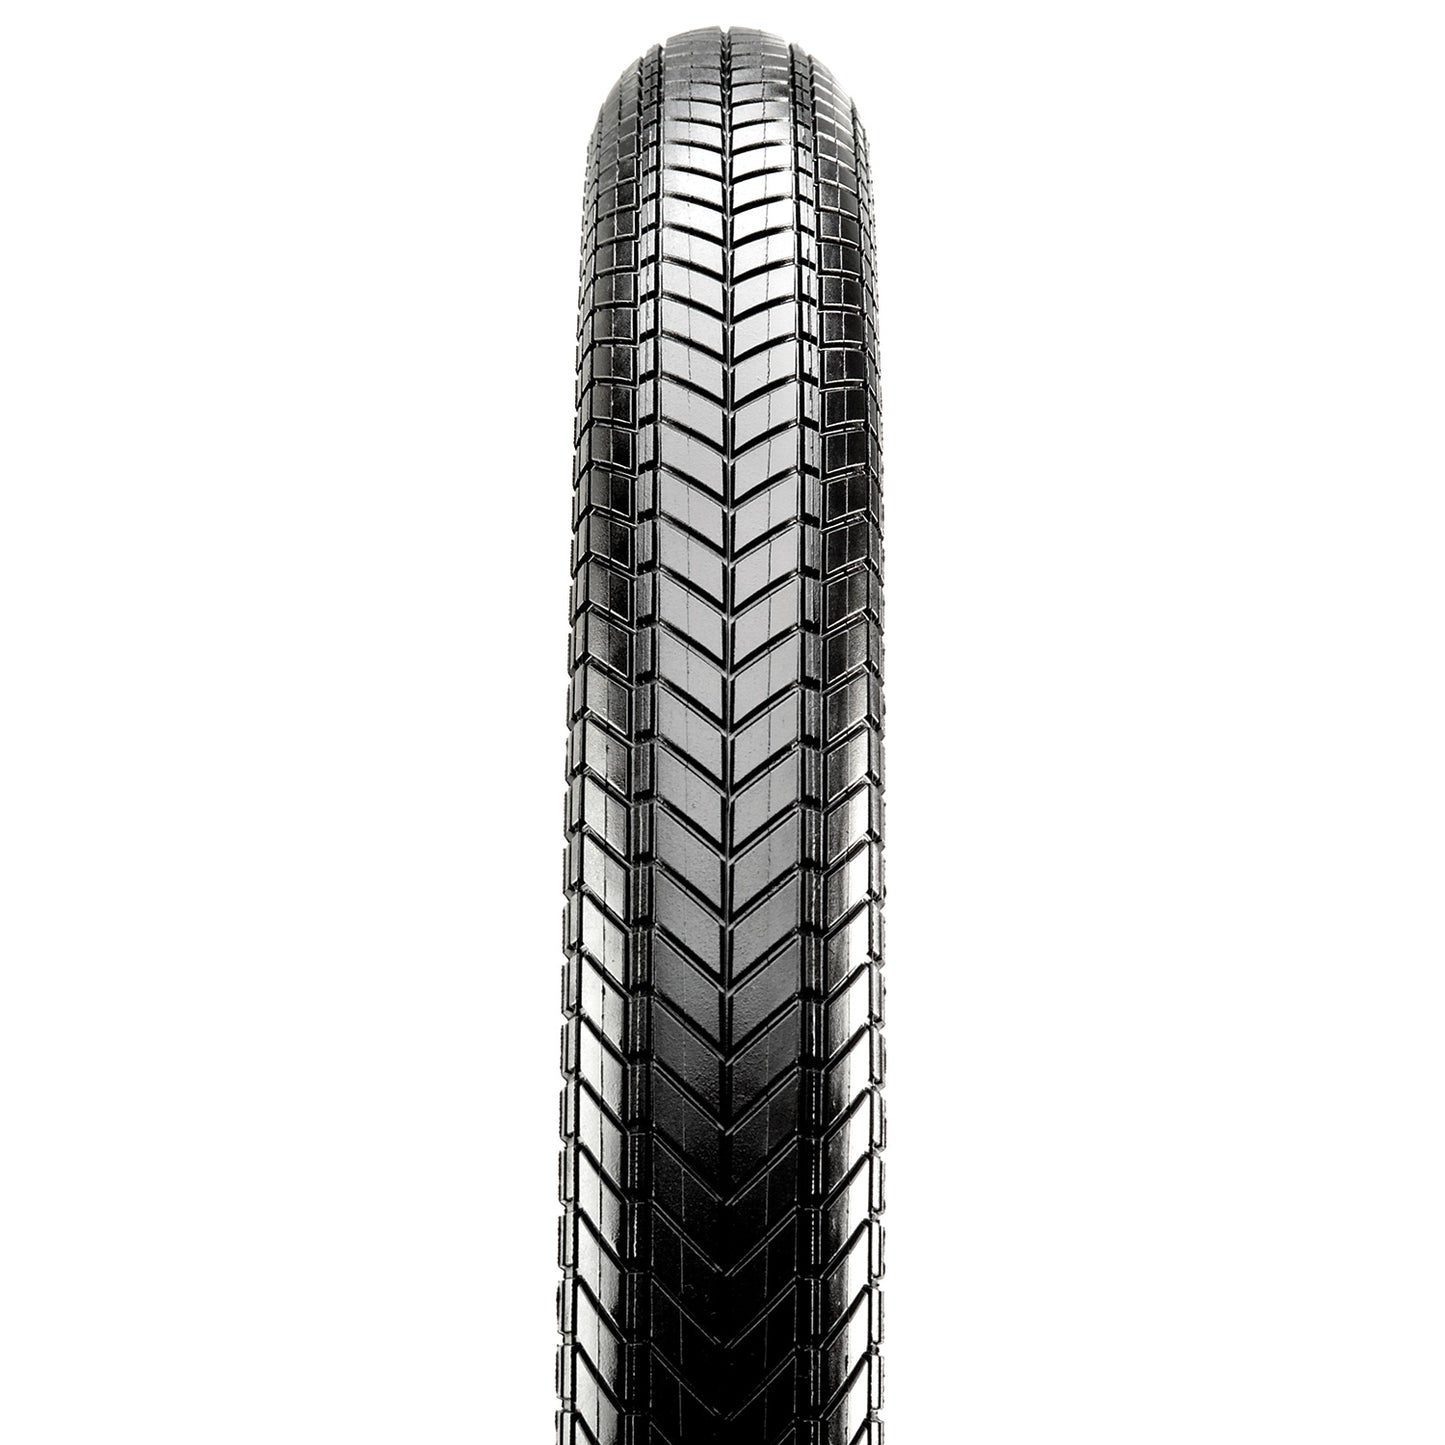 Maxxis Grifter Tyre - Black - Wirebead - Single Ply - Single Compound - 2.0 Inch - 29 Inch